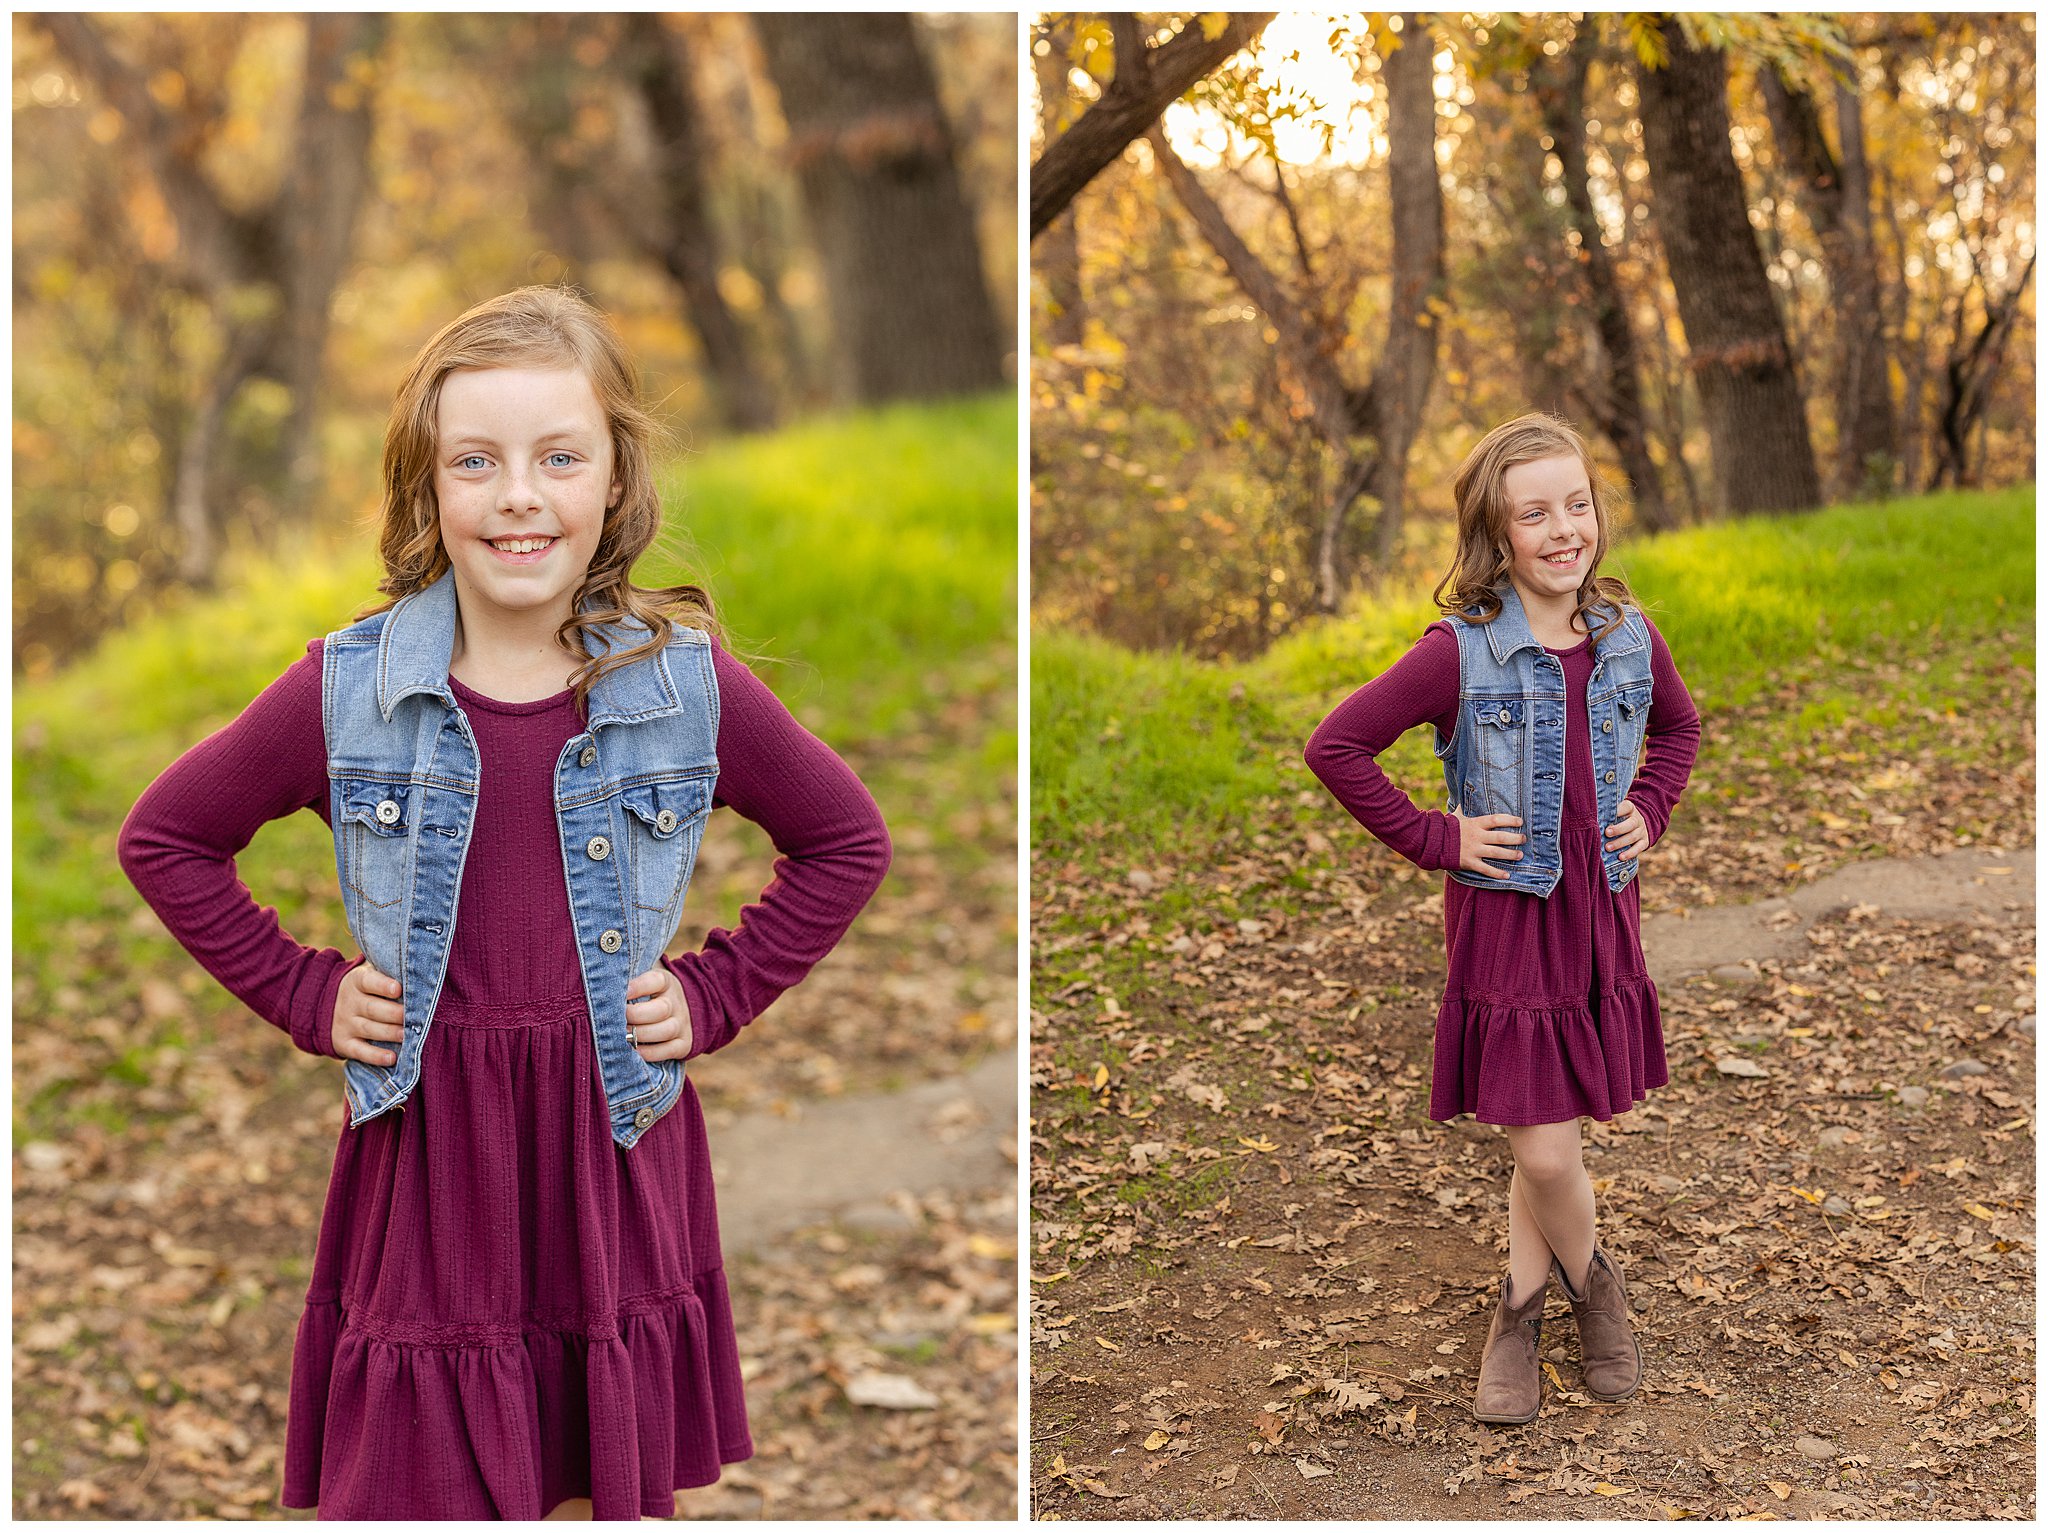 Upper Bidwell Park Chico CA Family Session Extended Family Fall November,